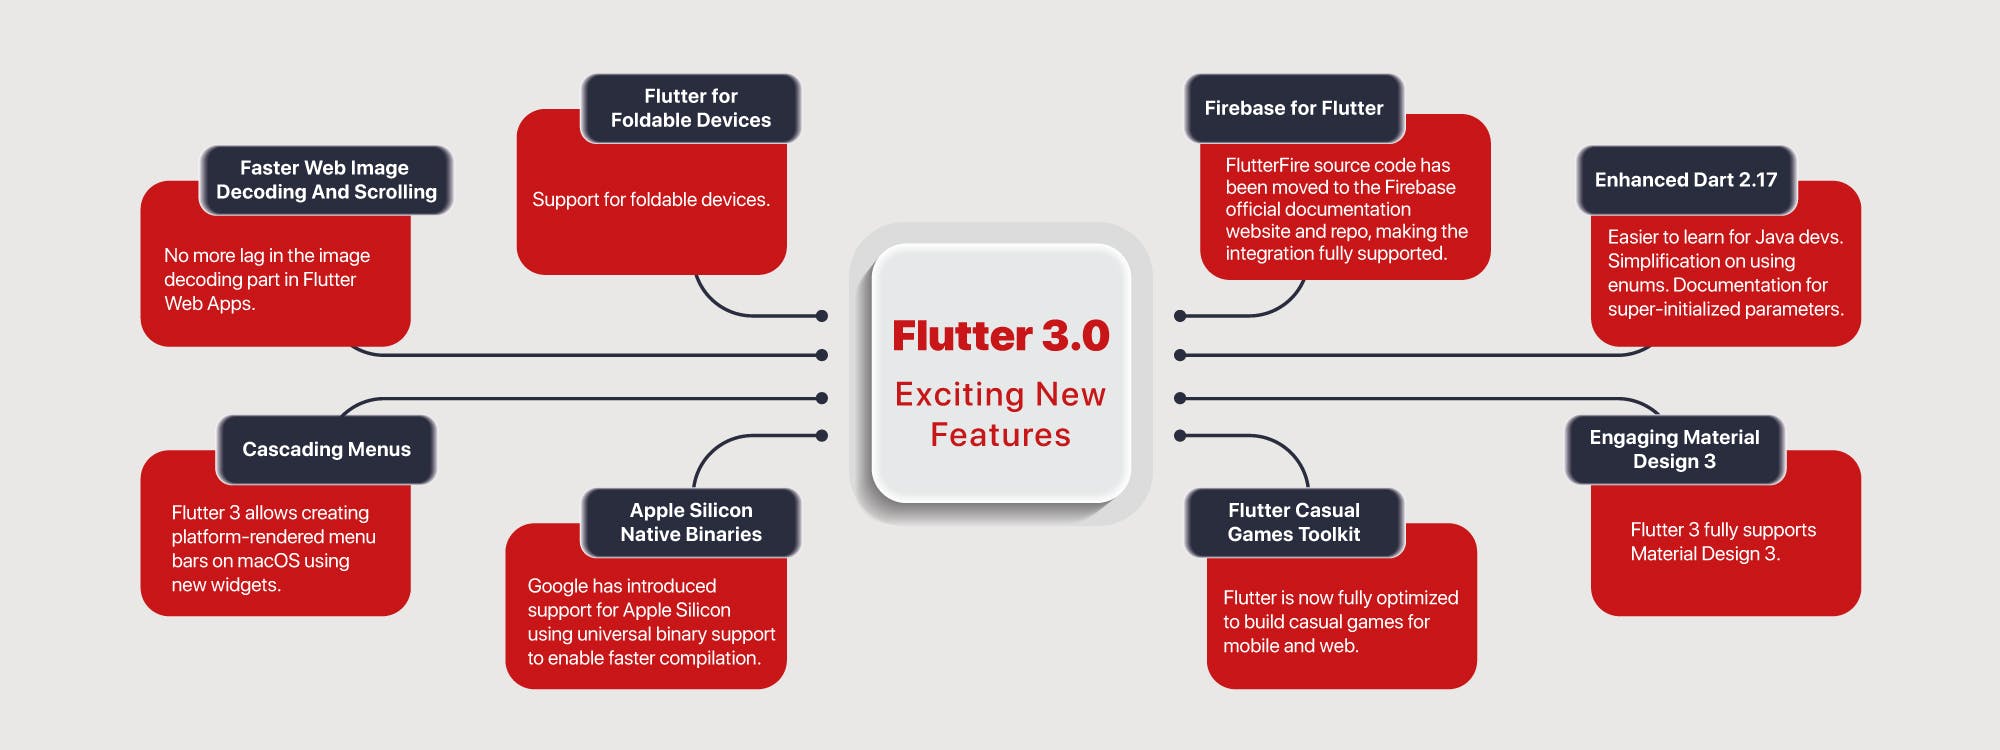 New Features in Flutter 3.0